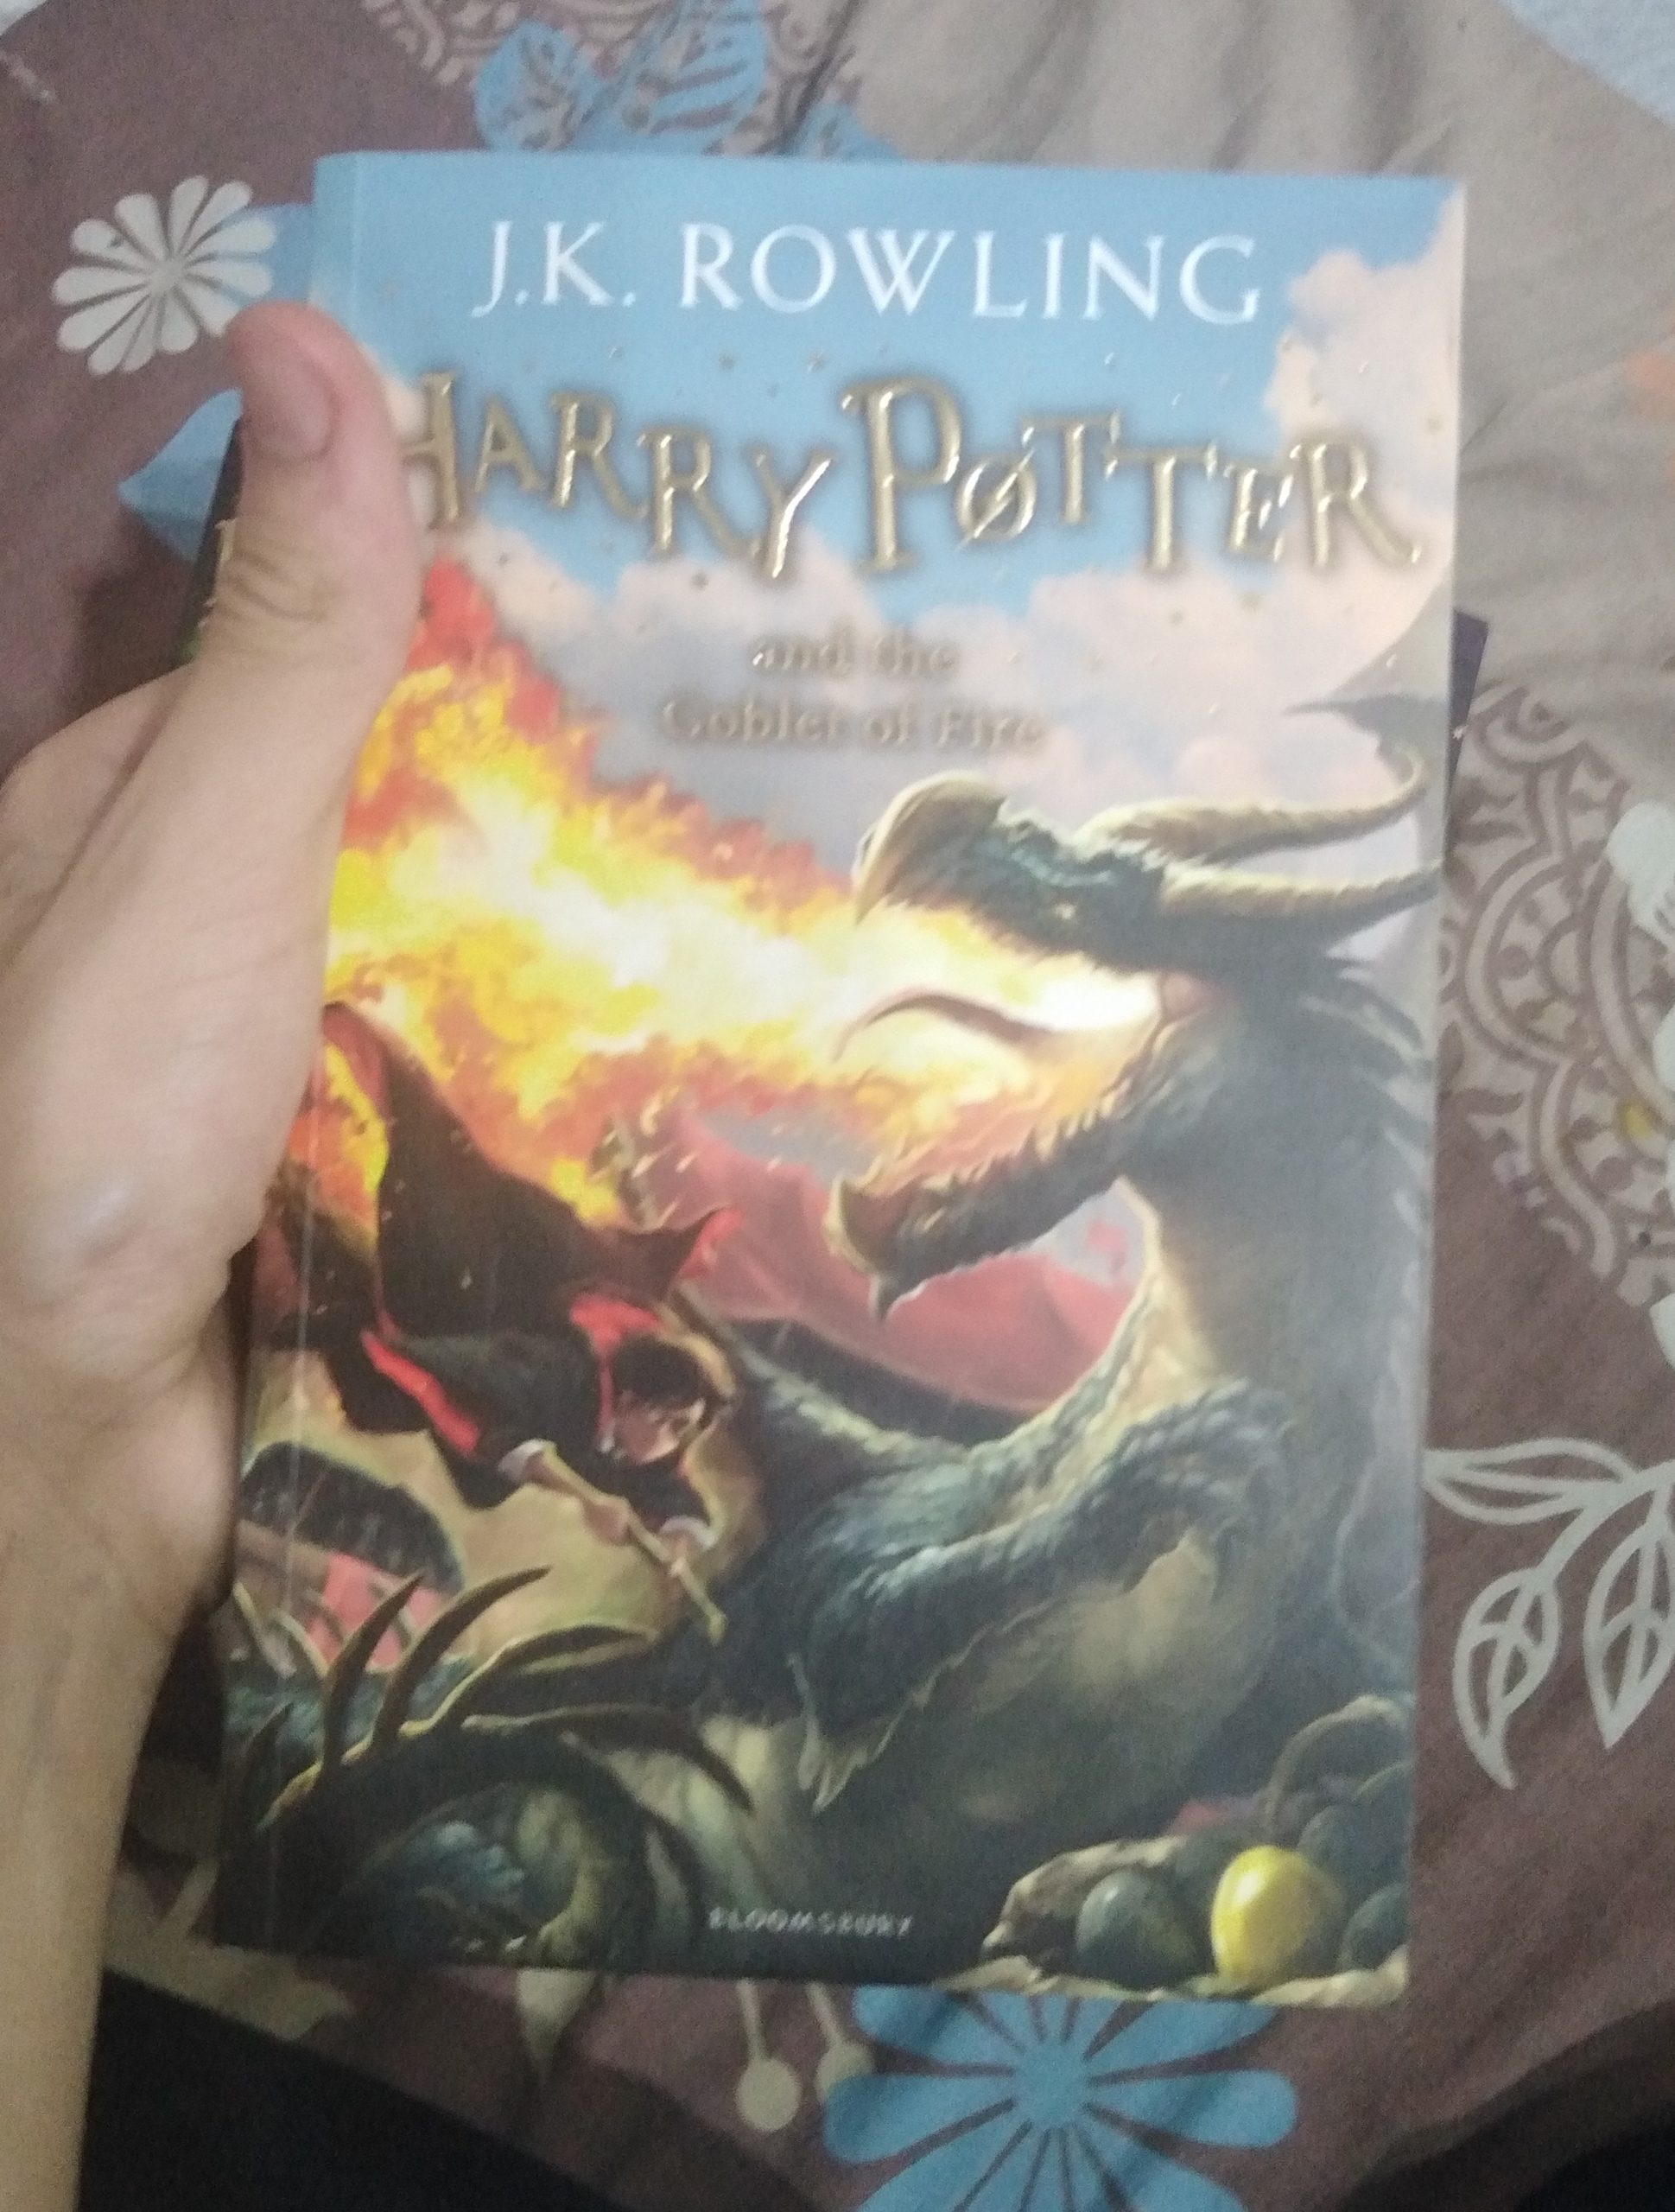 Harry potter book (first 4l)